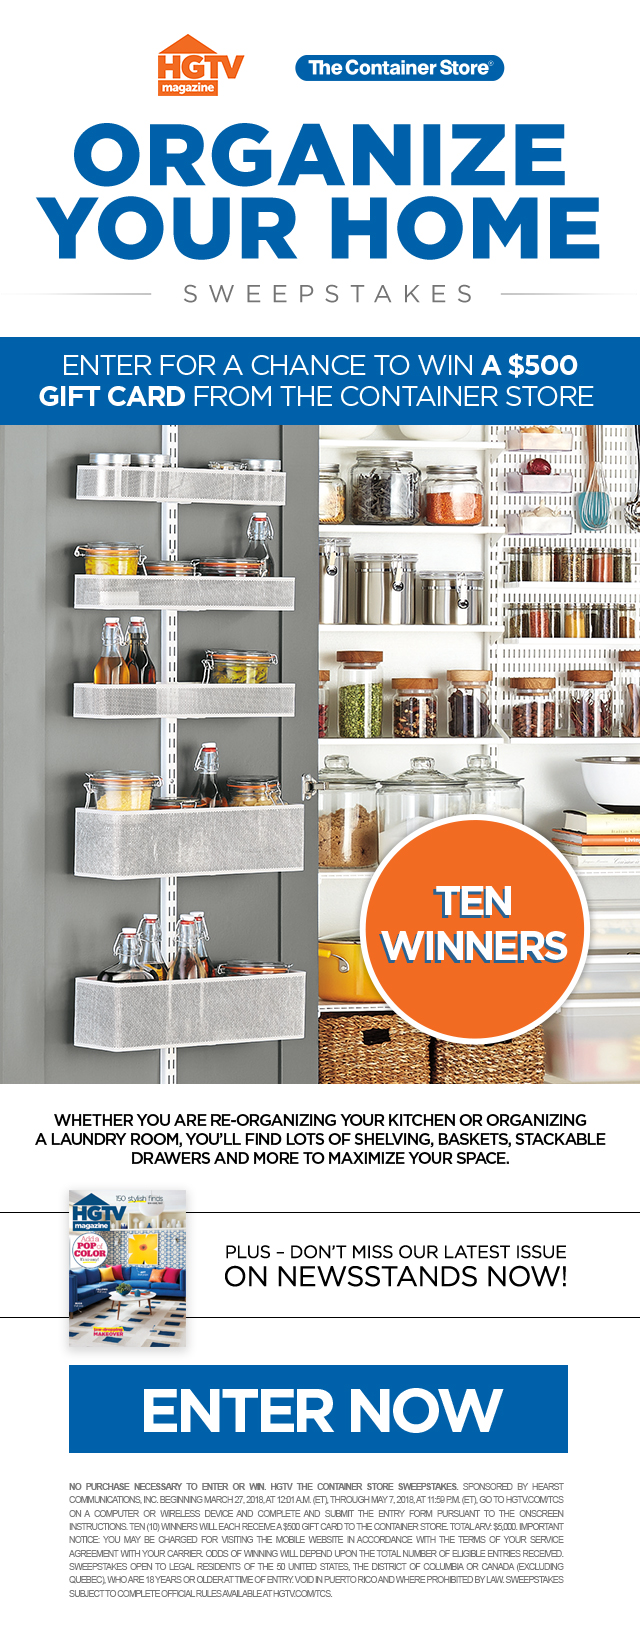 Organize Your Home Sweepstakes. Enter for a chance to win a $500 gift card from The Container Store. Ten Winners. Whether you are re-organizing your kitchen or organizing a laundry room, you'll find lots of shelving, baskets, stackable drawers and more to maximize your space. Plus, don't miss our latest issue - on newsstands now! Enter now. NO PURCHASE NECESSARY TO ENTER OR WIN. HGTV The Container Store Sweepstakes. Sponsored by Hearst Communications, Inc. Beginning March 27, 2018, at 12:01 A.M. (ET), through May 7, 2018, at 11:59 P.M. (ET), go to hgtv.com/tcs on a computer or wireless device and complete and submit the entry form pursuant to the onscreen instructions. Ten (10) winners will each receive a $500 gift card to The Container Store. Total ARV: $5,000. Important Notice: You may be charged for visiting the mobile website in accordance with the terms of your service agreement with your carrier. Odds of winning will depend upon the total number of eligible entries received. Sweepstakes open to legal residents of the 50 United States, the District of Columbia or Canada (excluding Quebec), who are 18 years or older at time of entry. Void in Puerto Rico and where prohibited by law. Sweepstakes subject to complete official rules available at hgtv.com/tcs.